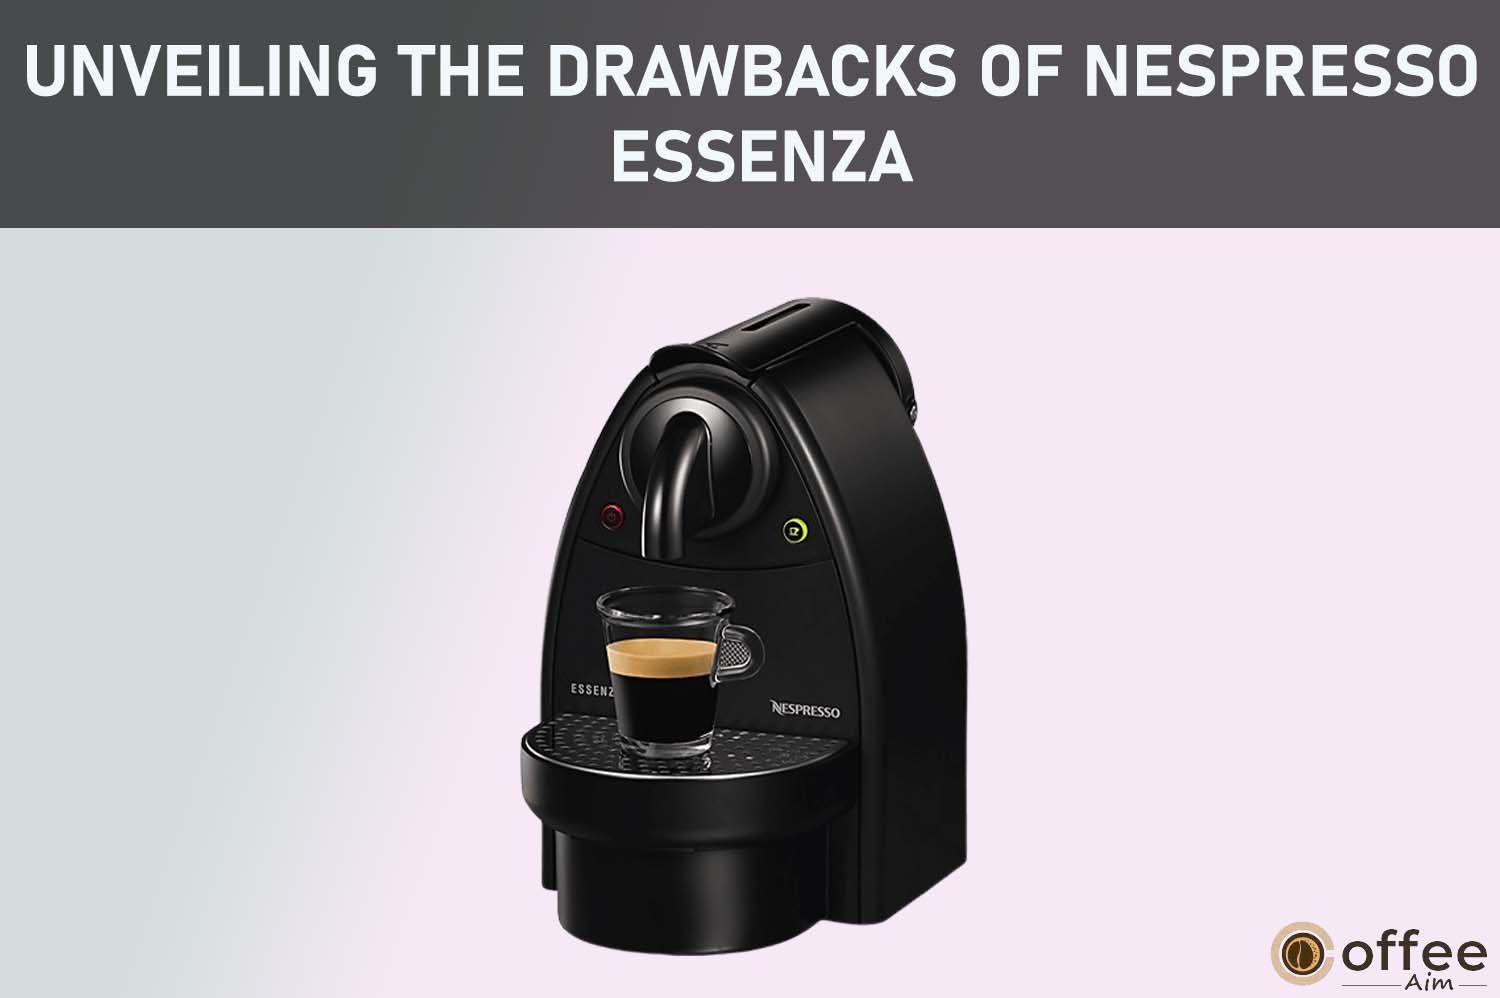 Feature image for the article "Unveiling the Drawbacks of Nespresso Essenza"